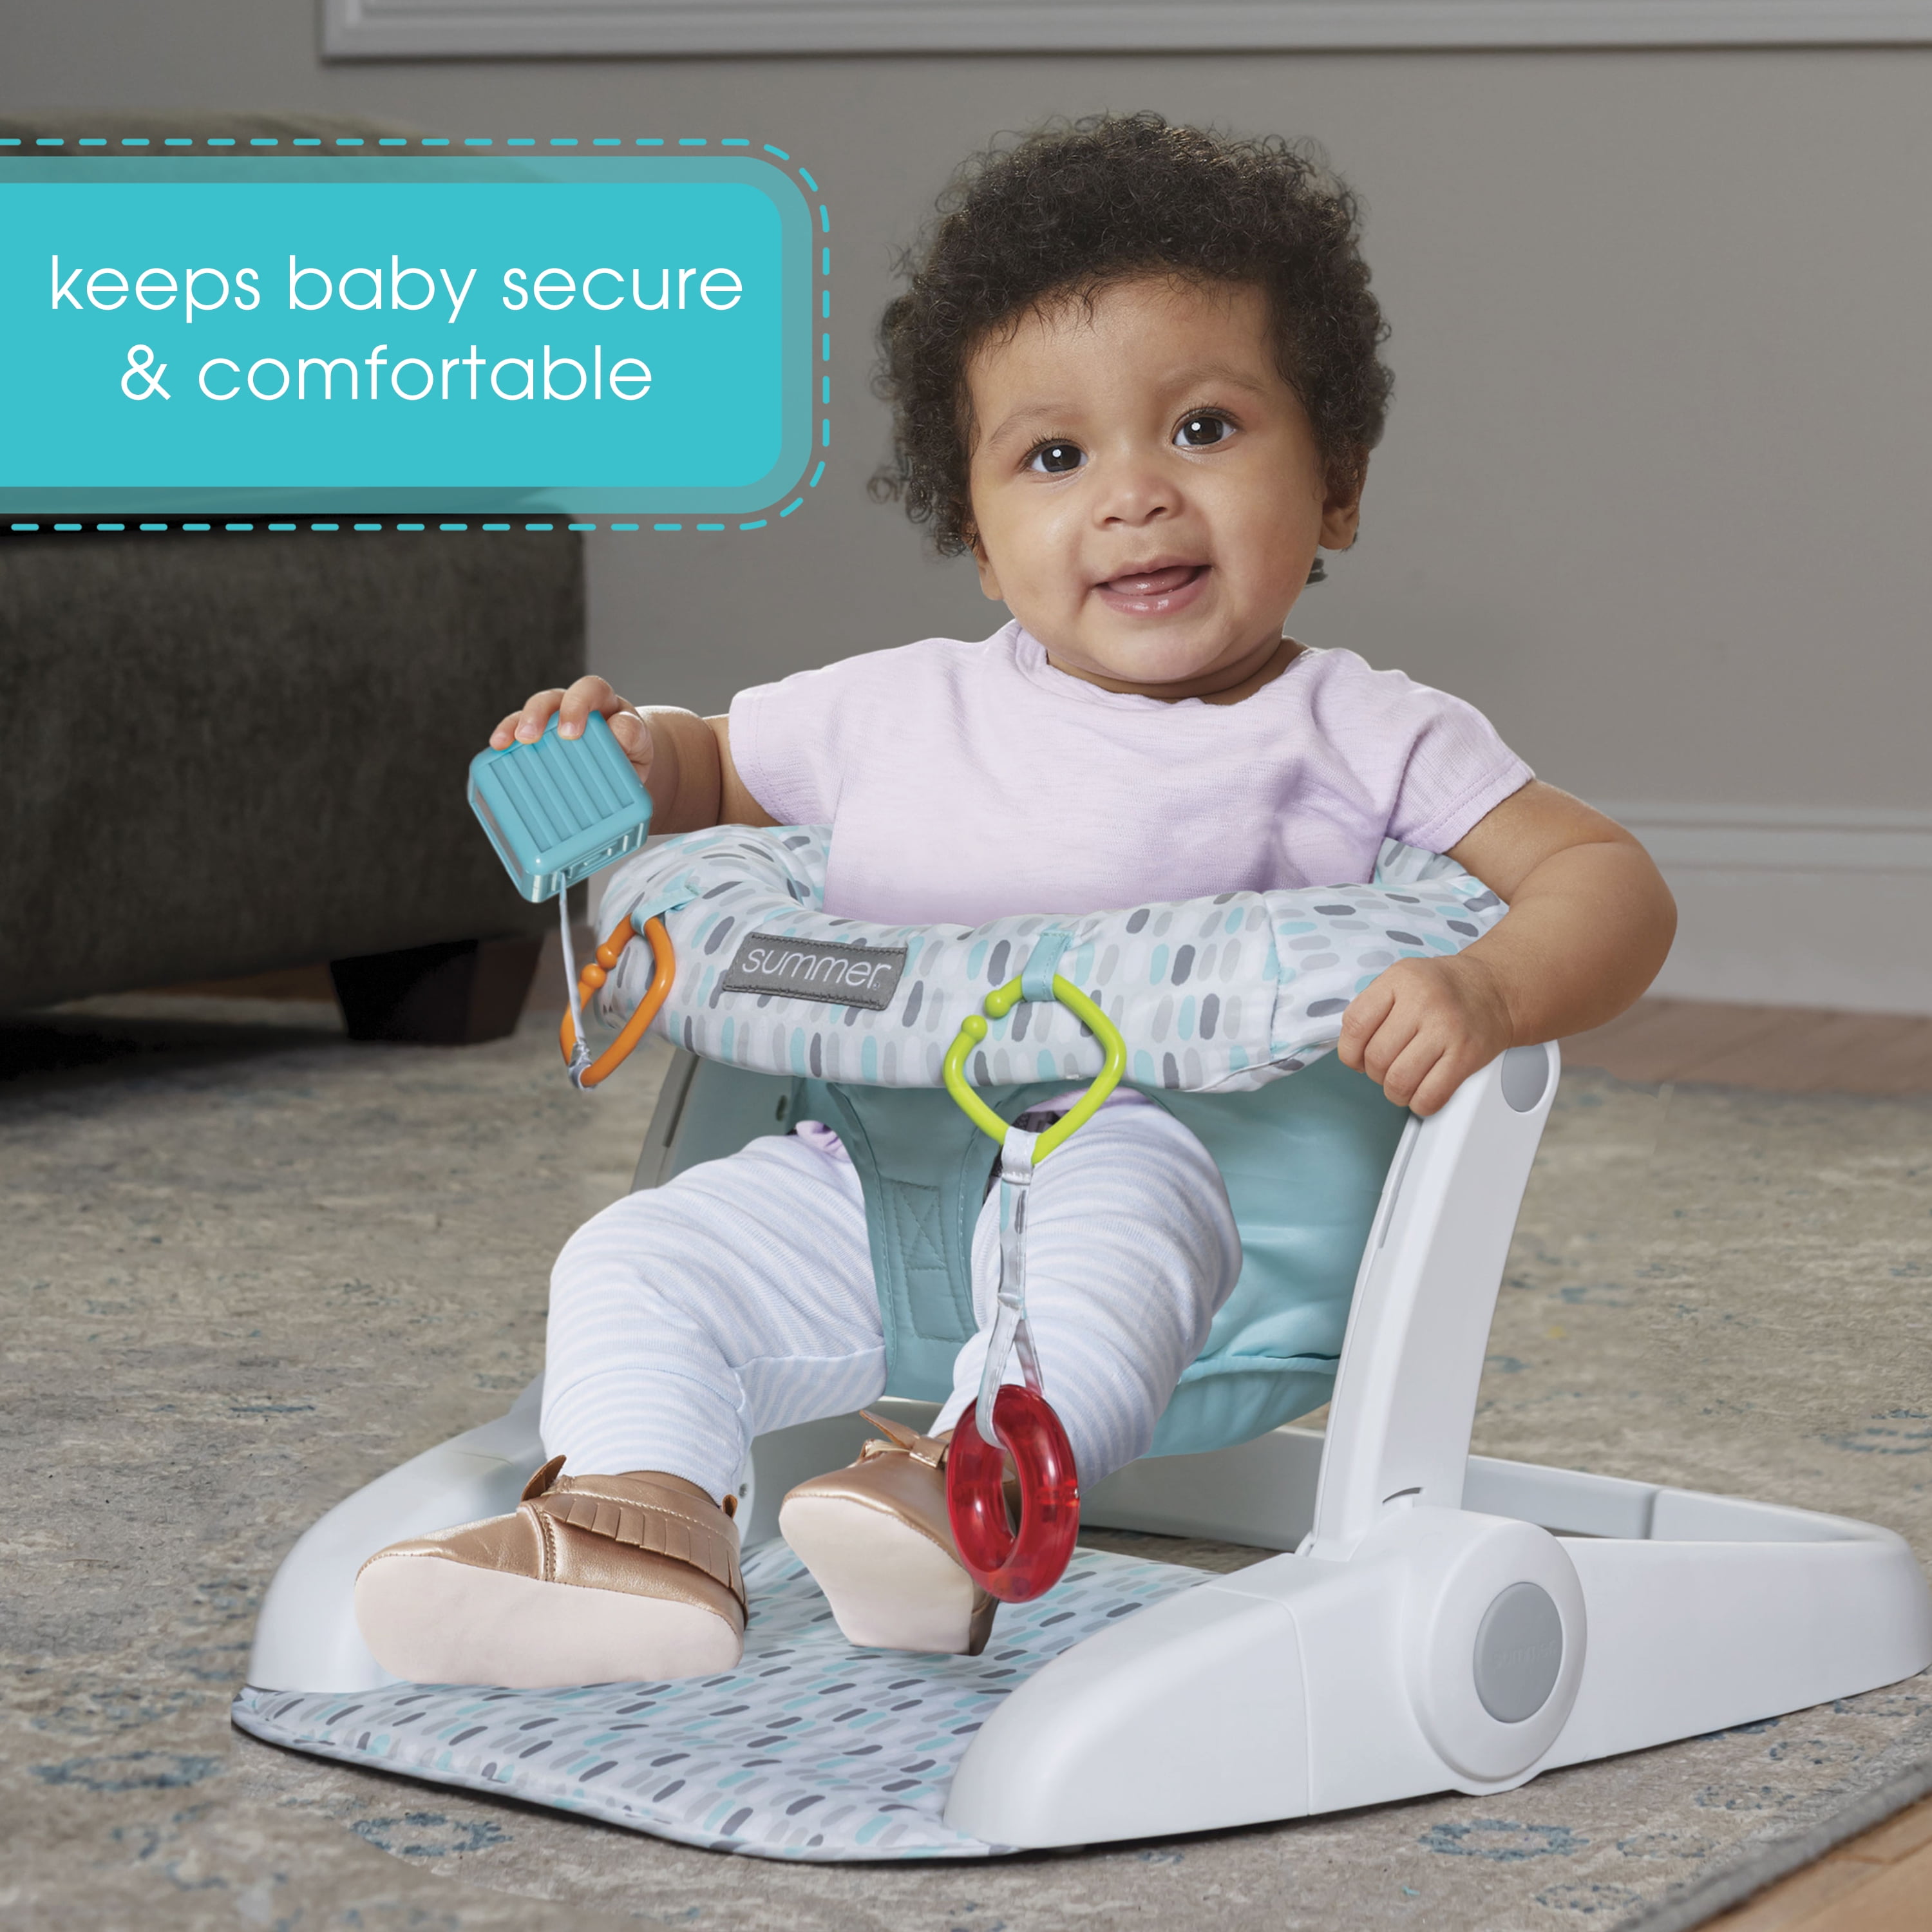 Uuoeebb Portable High Chair for Babies and Toddlers, Booster Seat